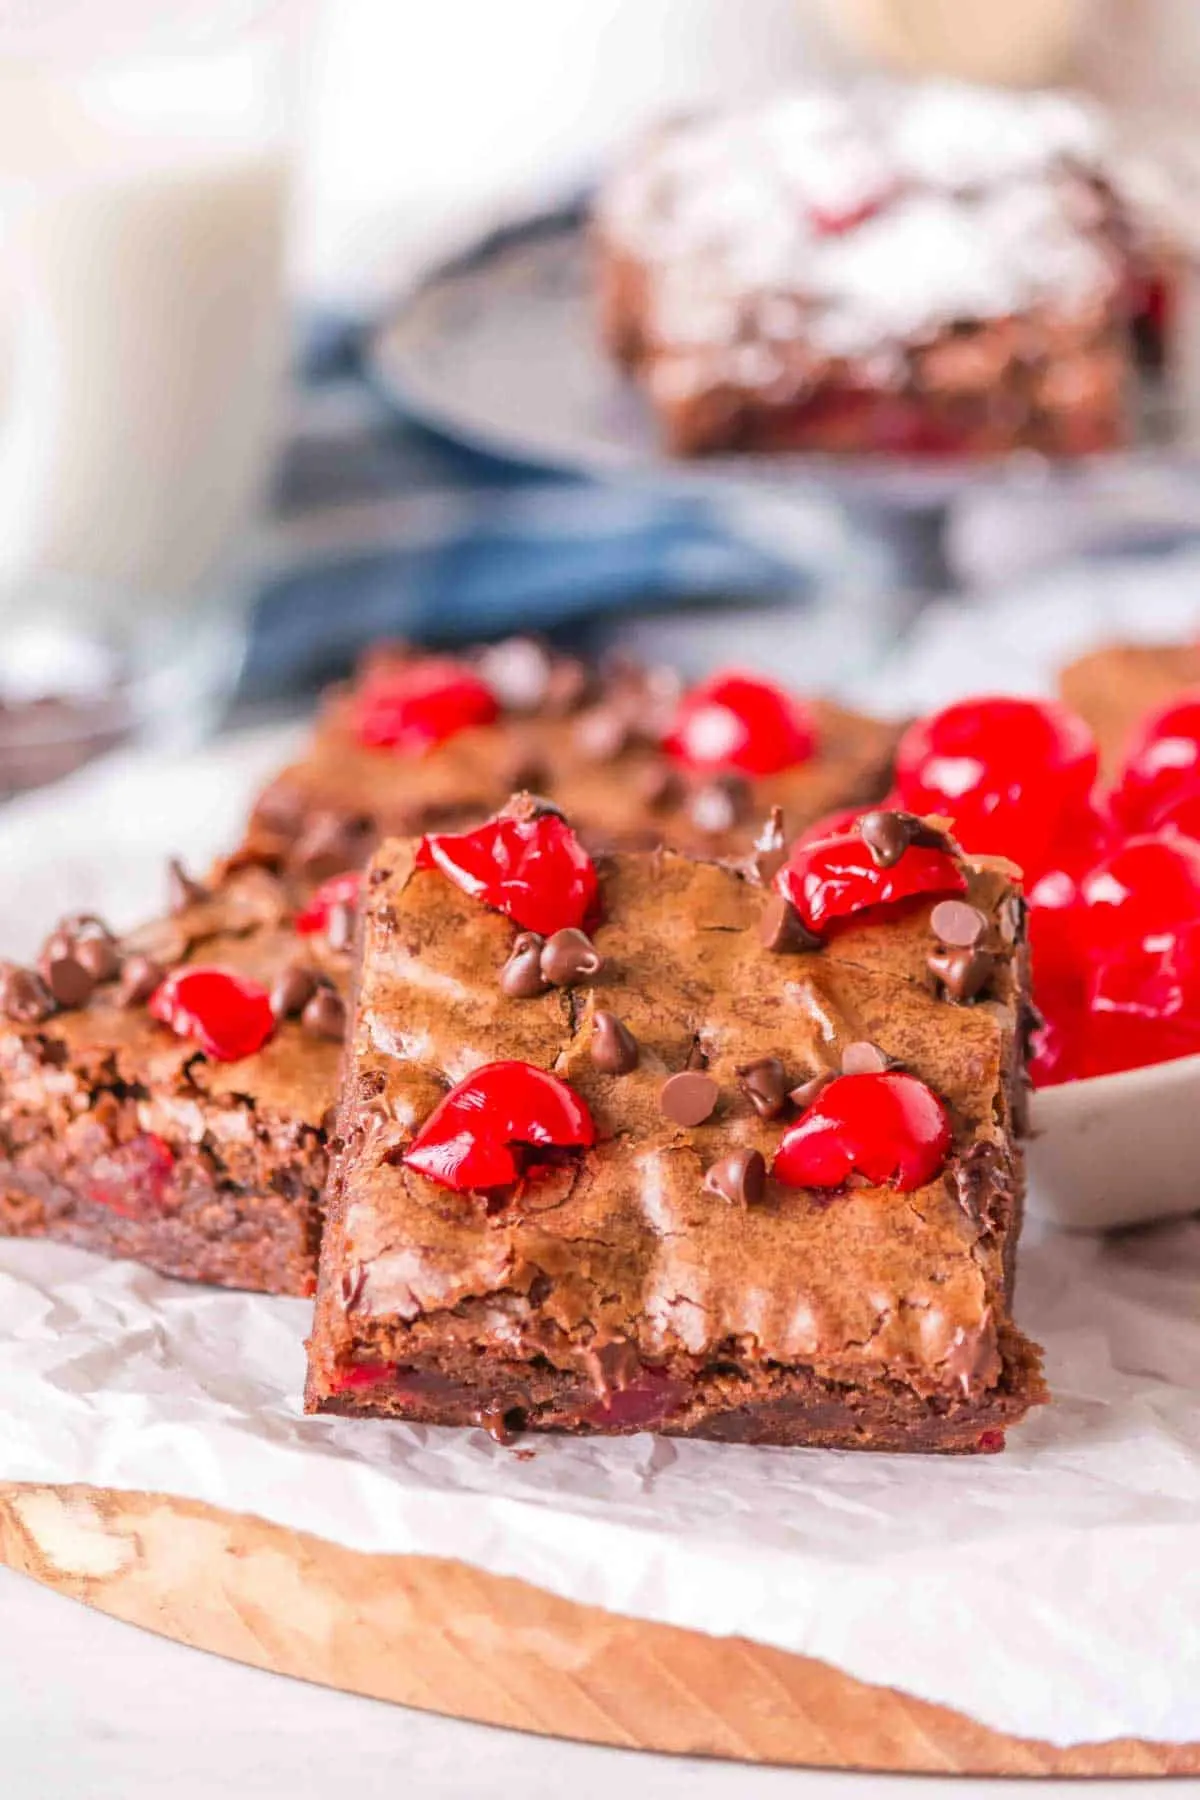 Maraschino Cherry Brownies are decadent chocolate brownies made with boxed brownie mix, chocolate chips, maraschino cherries and instant coffee.